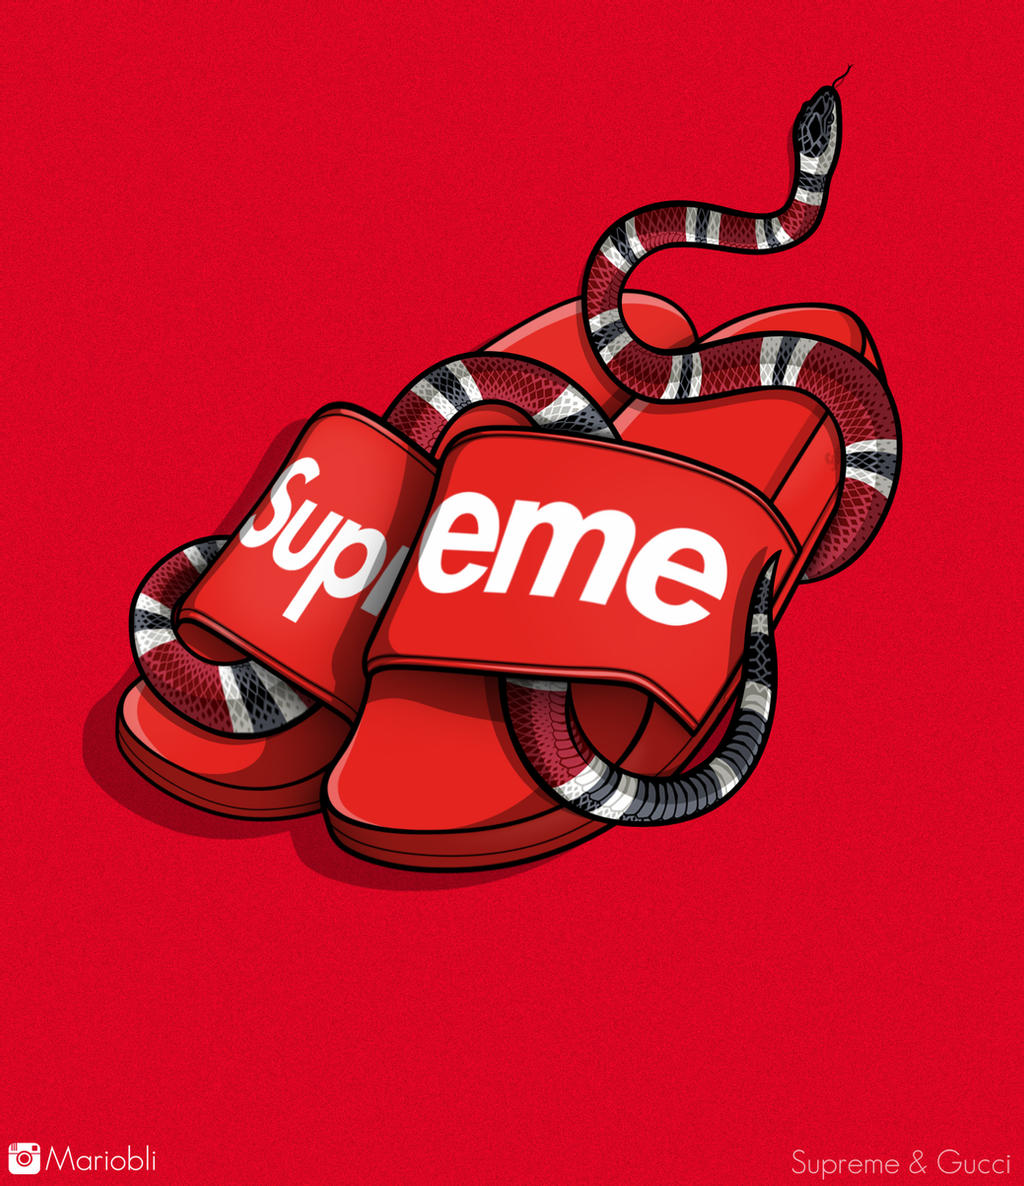 Luis Vuitton Supreme wallpaper by Br0kn - Download on ZEDGE™